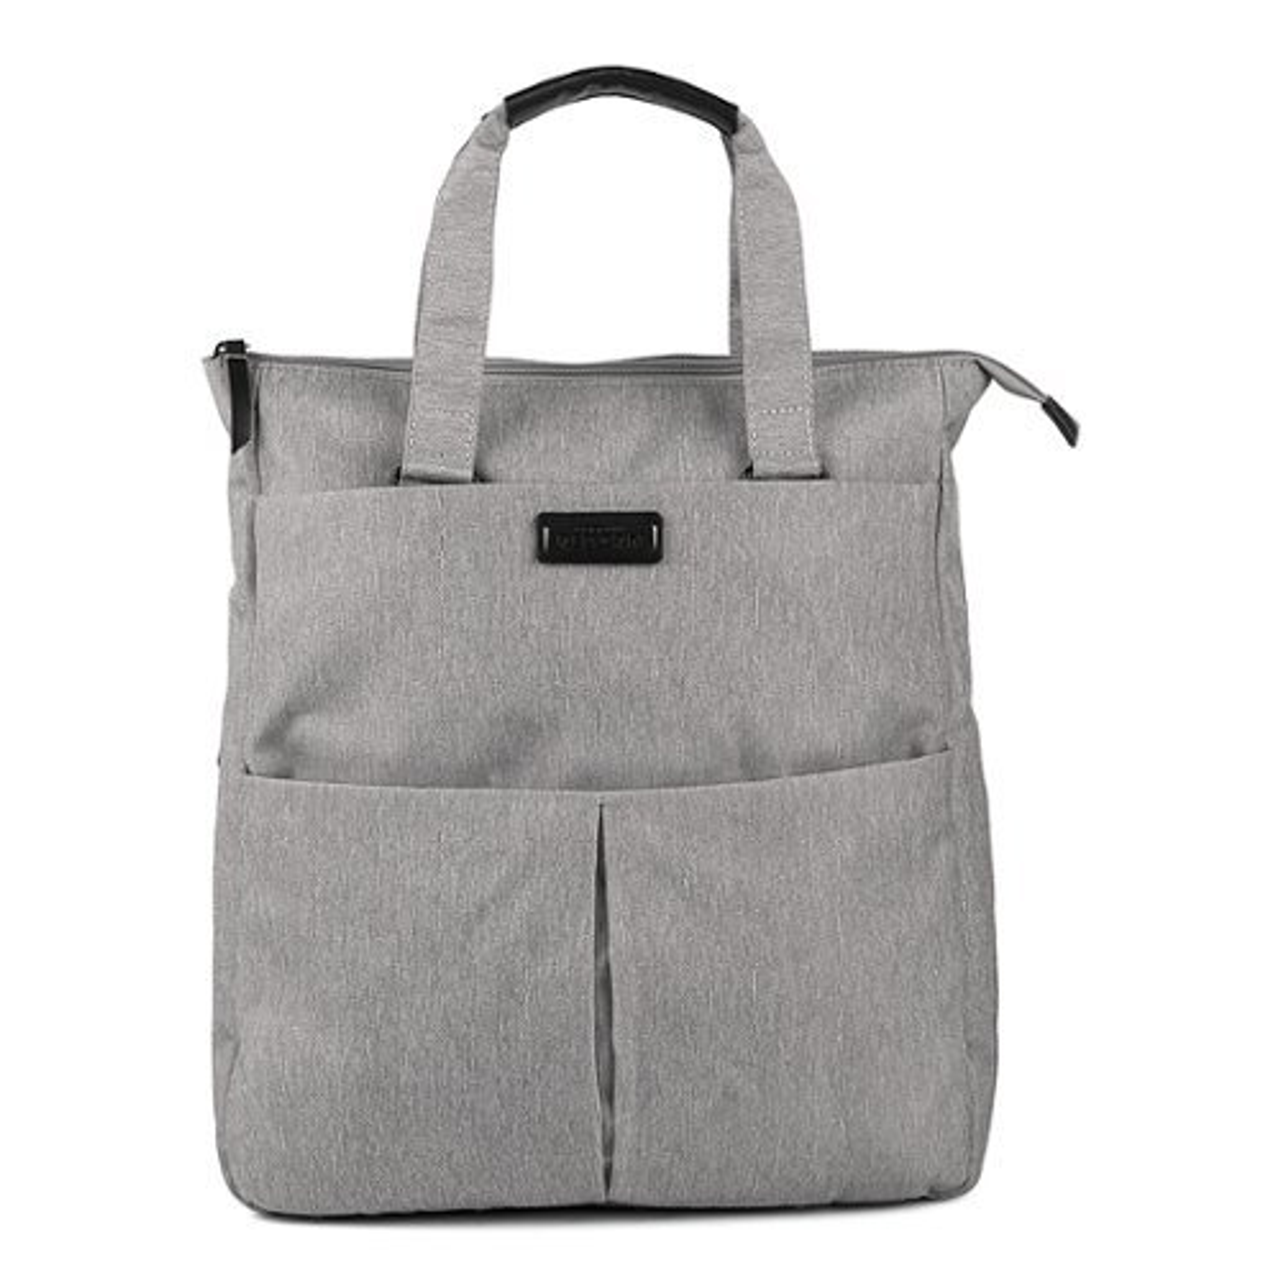 BUGATTI - Reborn Collection - 3 in 1 Tote - RPET Polyester - Gray